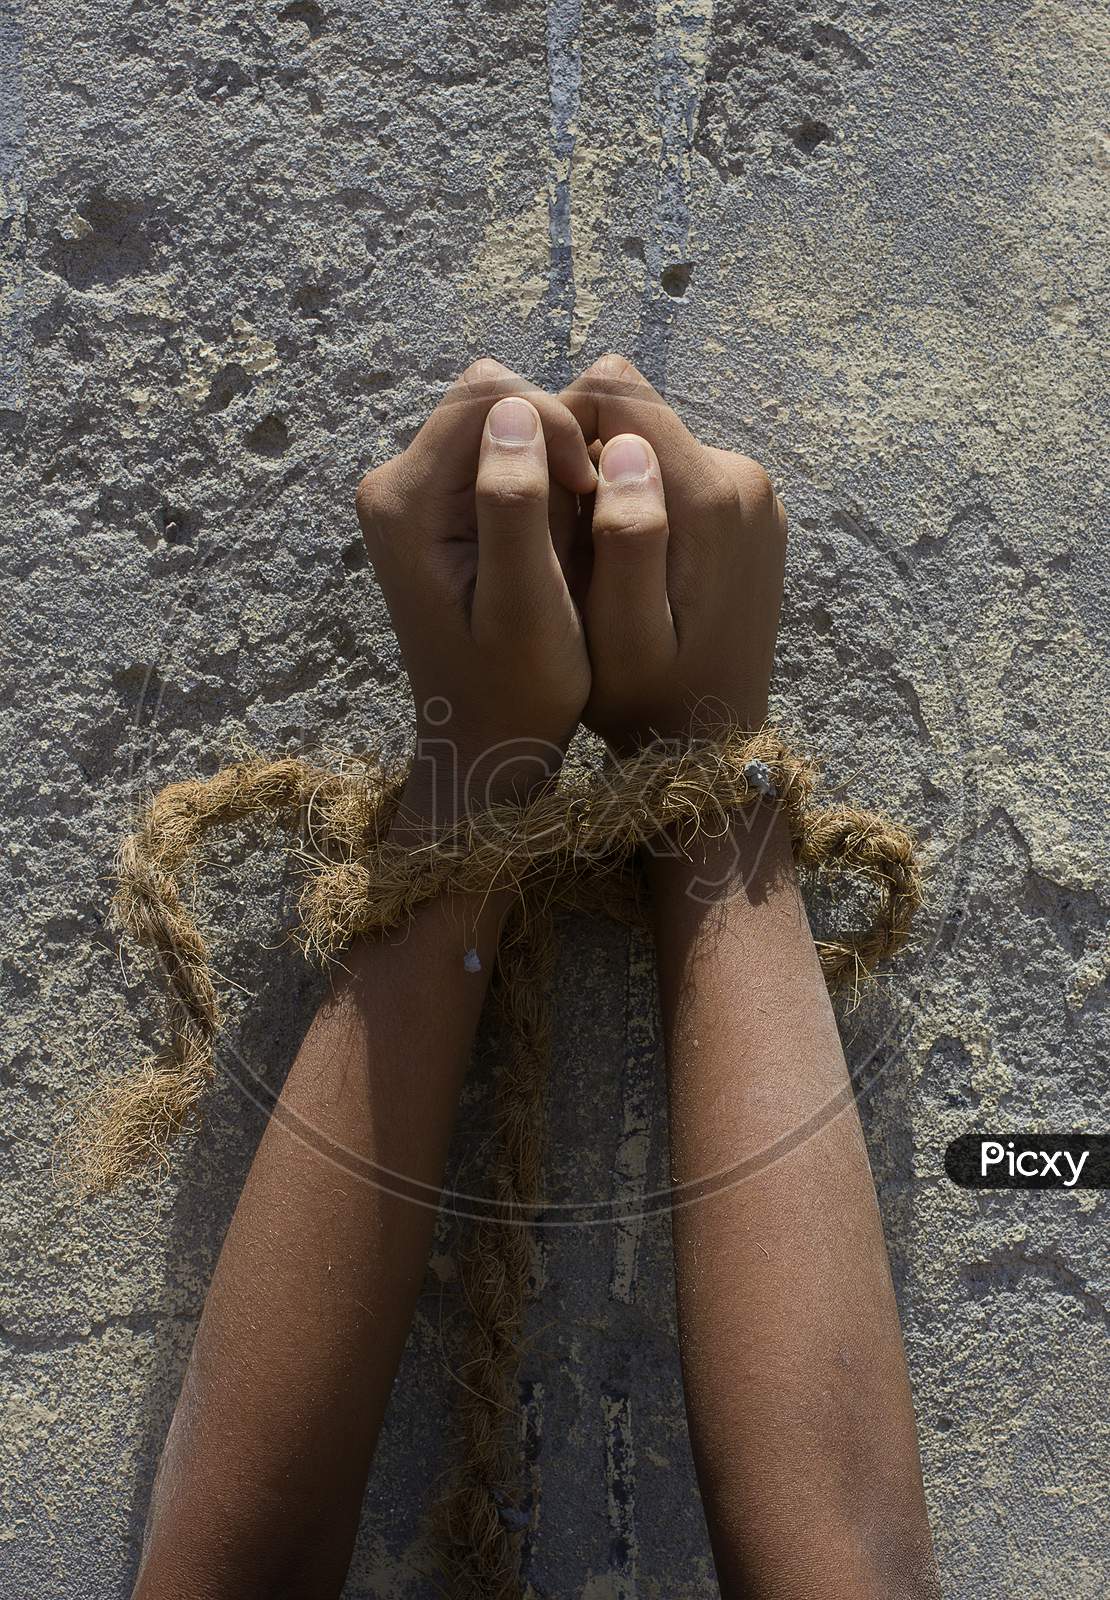 A Kid's Hands tide with Rope